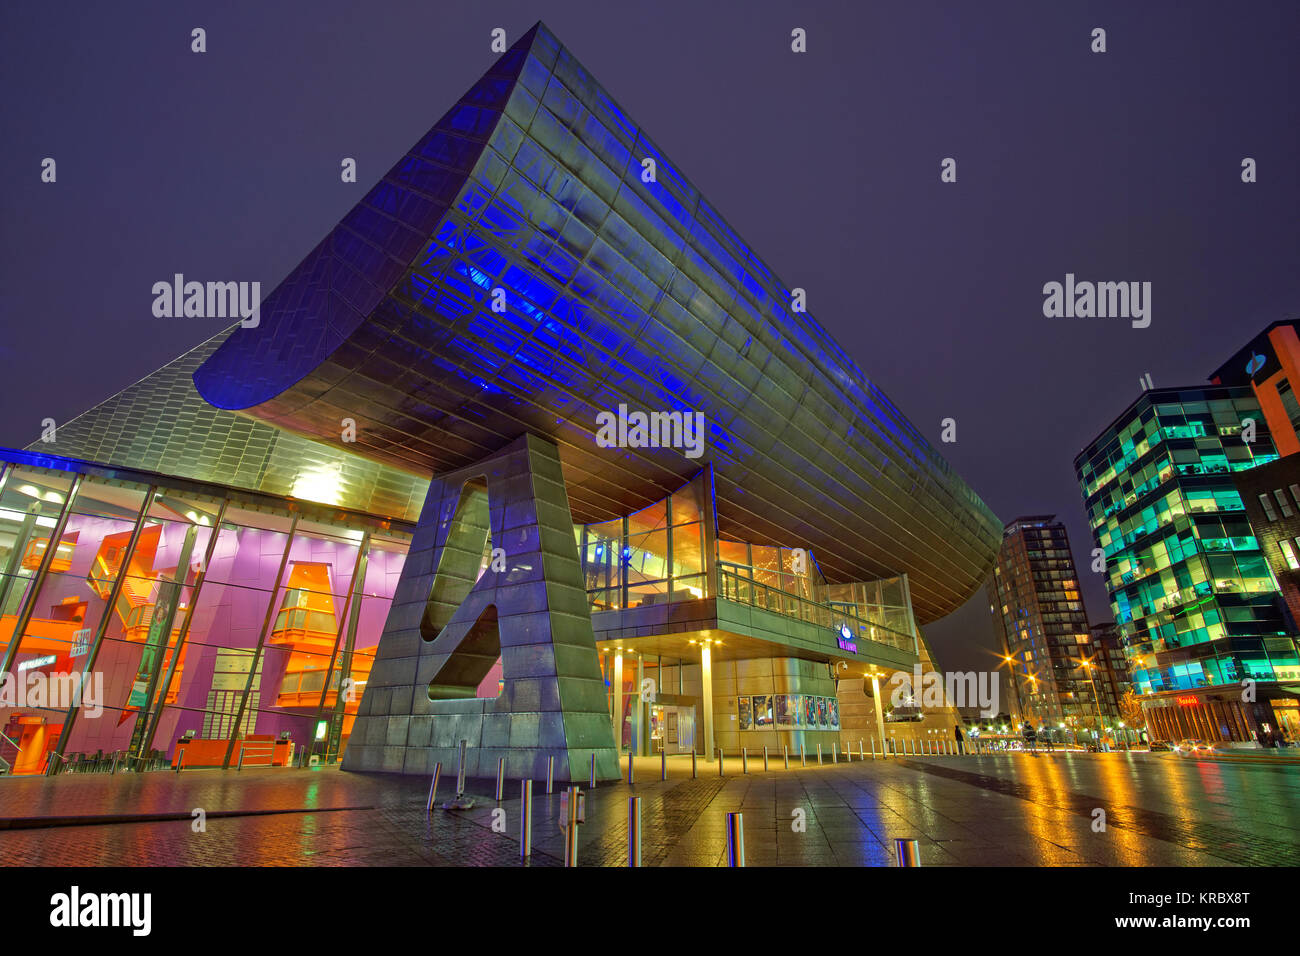 Das Lowry Theatre in Salford Quays, Salford, Greater Manchester. Stockfoto